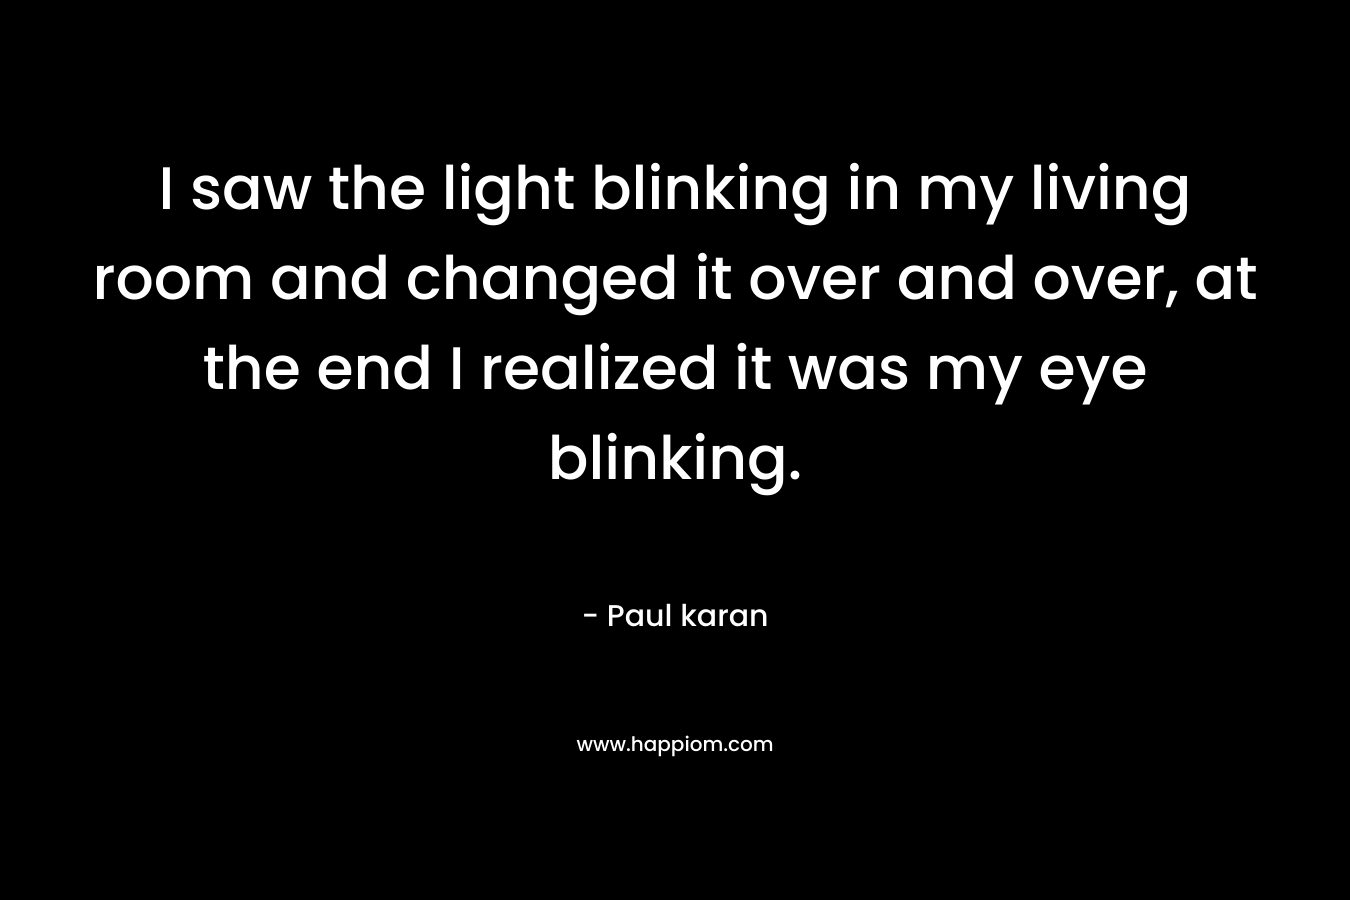 I saw the light blinking in my living room and changed it over and over, at the end I realized it was my eye blinking. – Paul karan